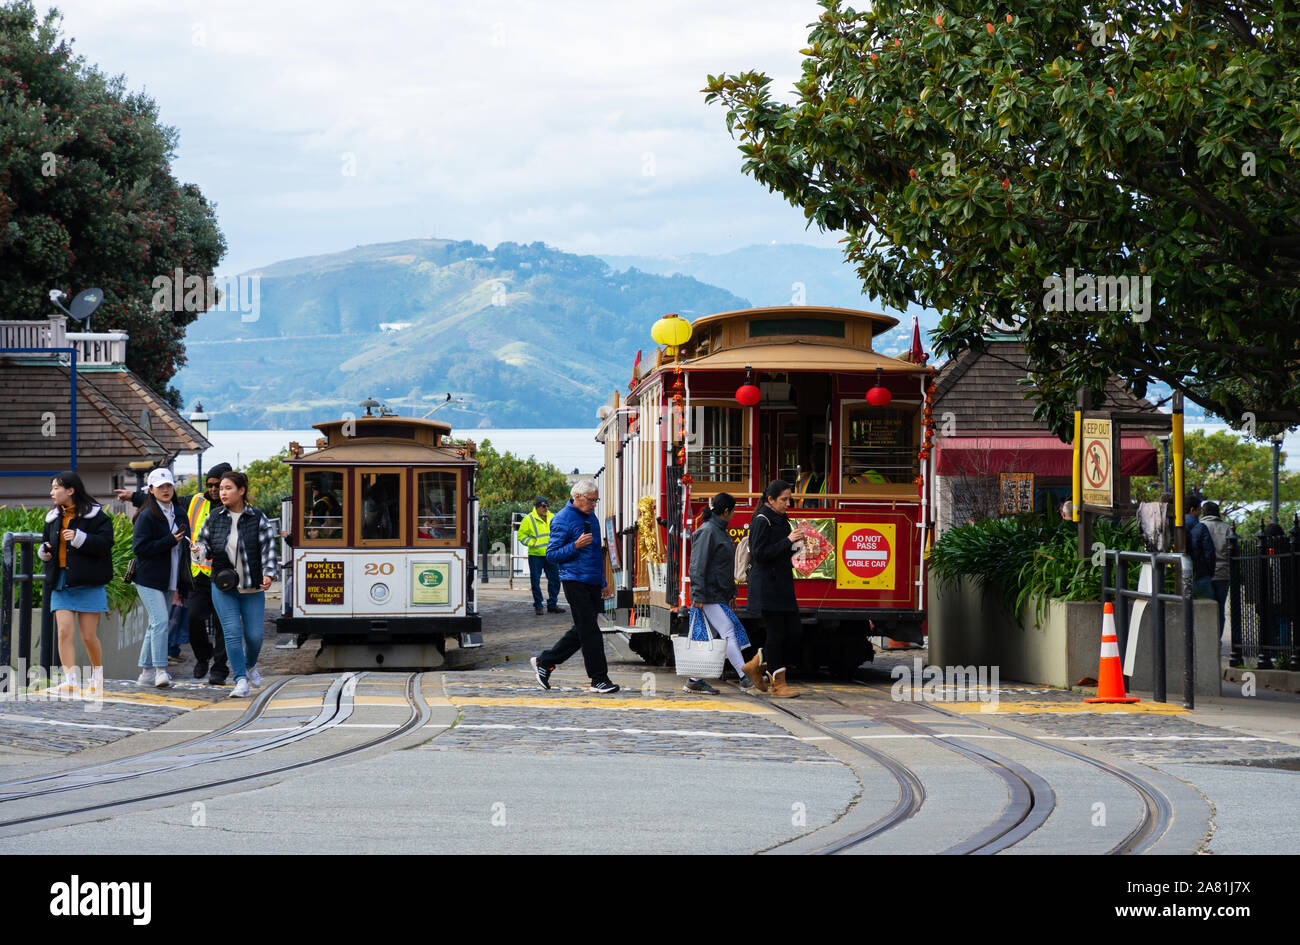 SAN FRANCISCO - February 08, 2019: Cable car on San Francisco streets. It’s the world's last manually operated cable car system and is the icon of the Stock Photo